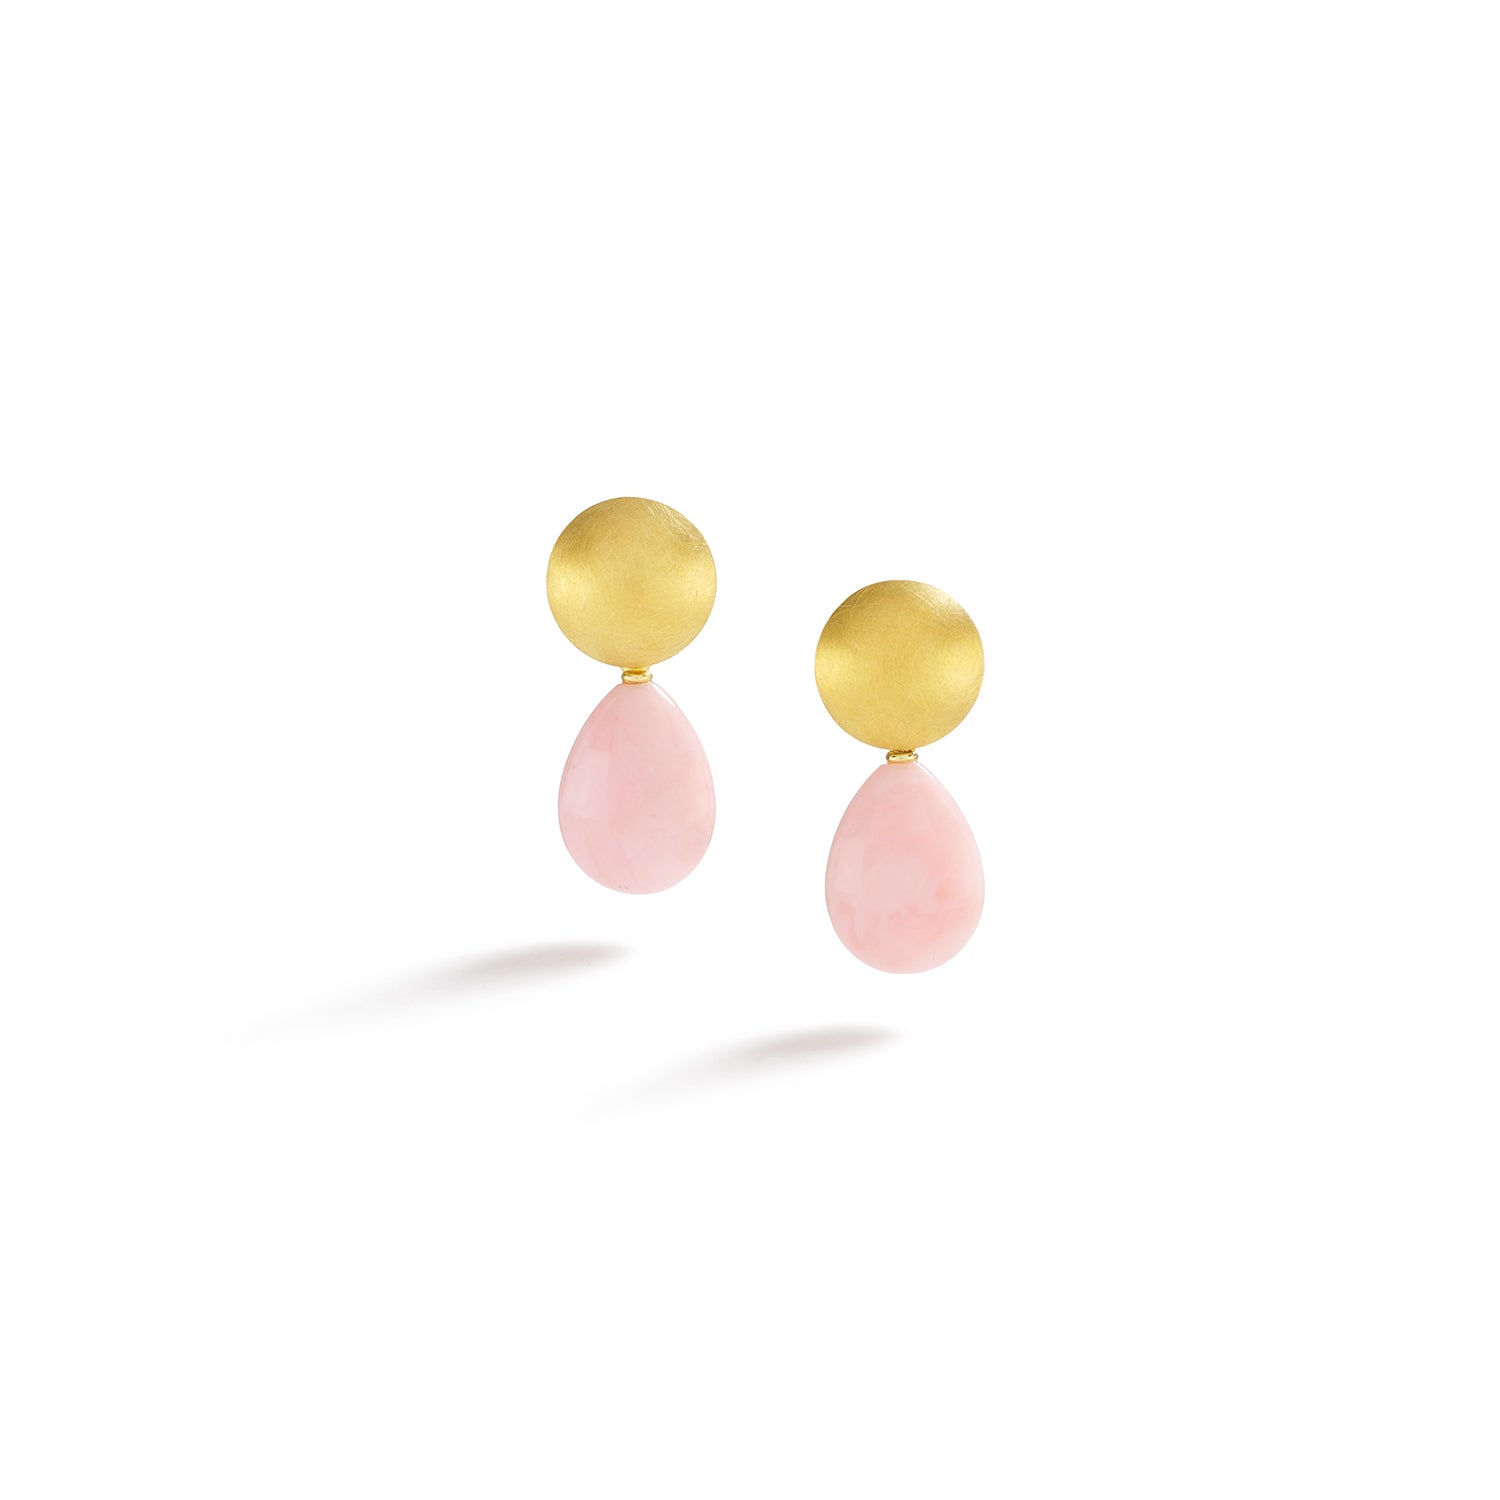 Medium Silver and Gold Dome Earrings